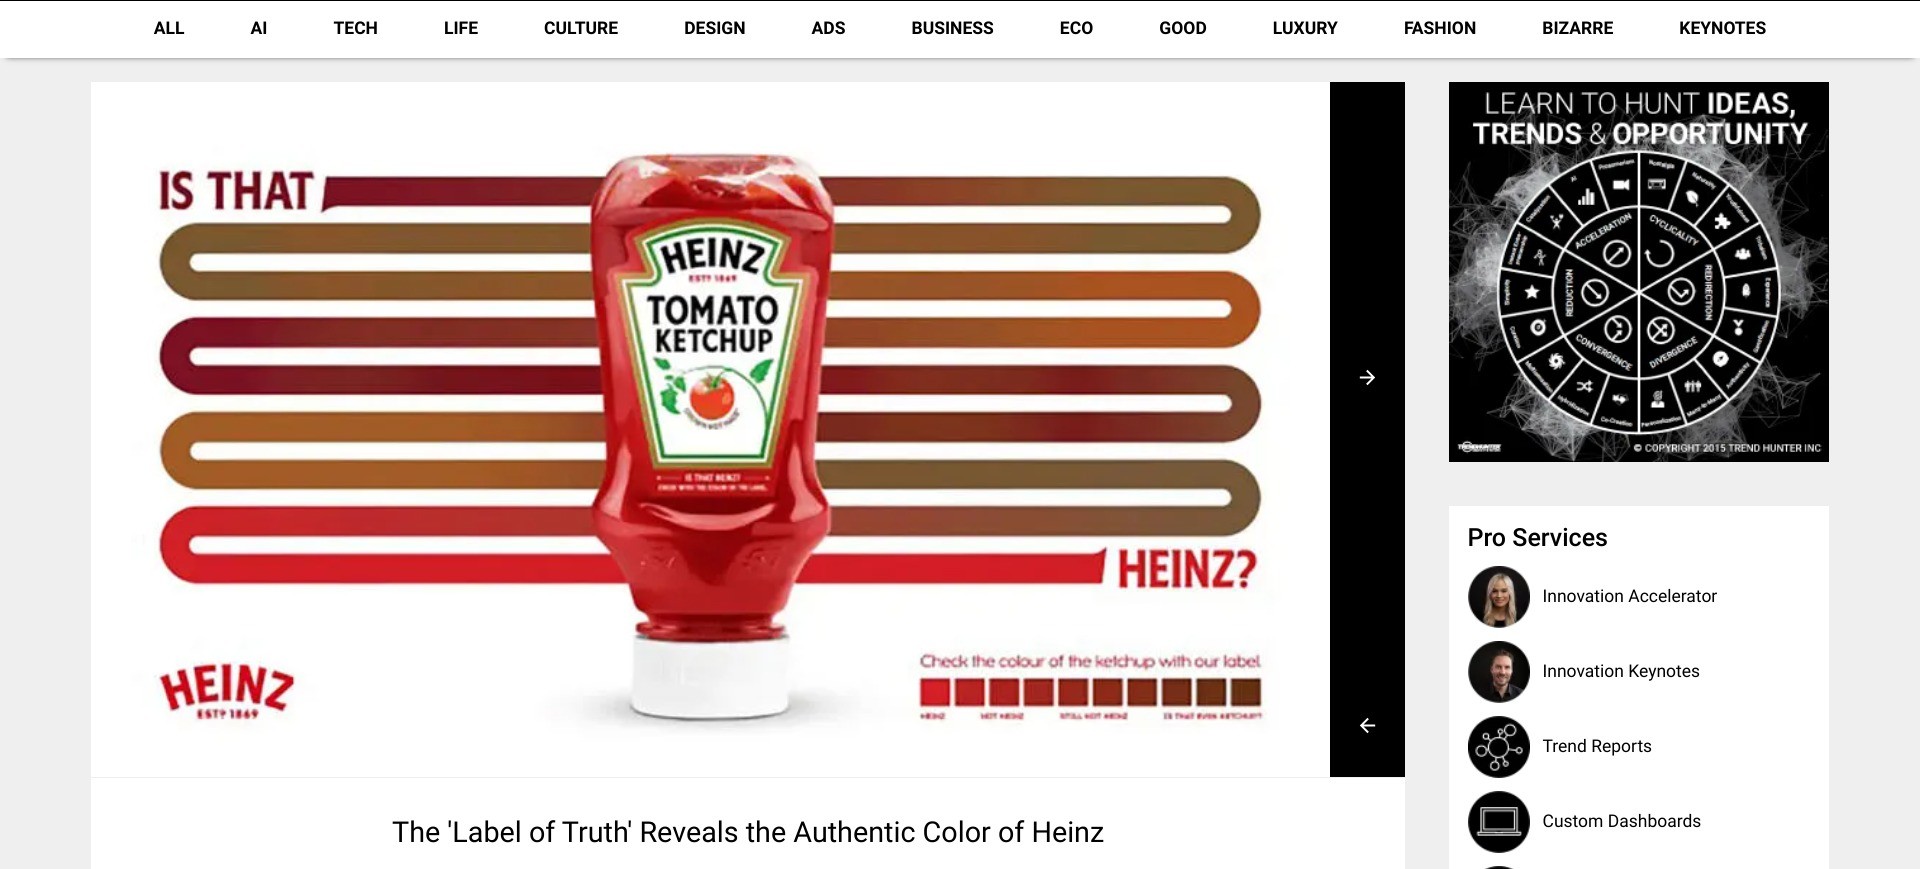 Ketchup_Labels_ color_code_Heinz_trademark_protection_online_brand_protection_services_globaleyez.jpg